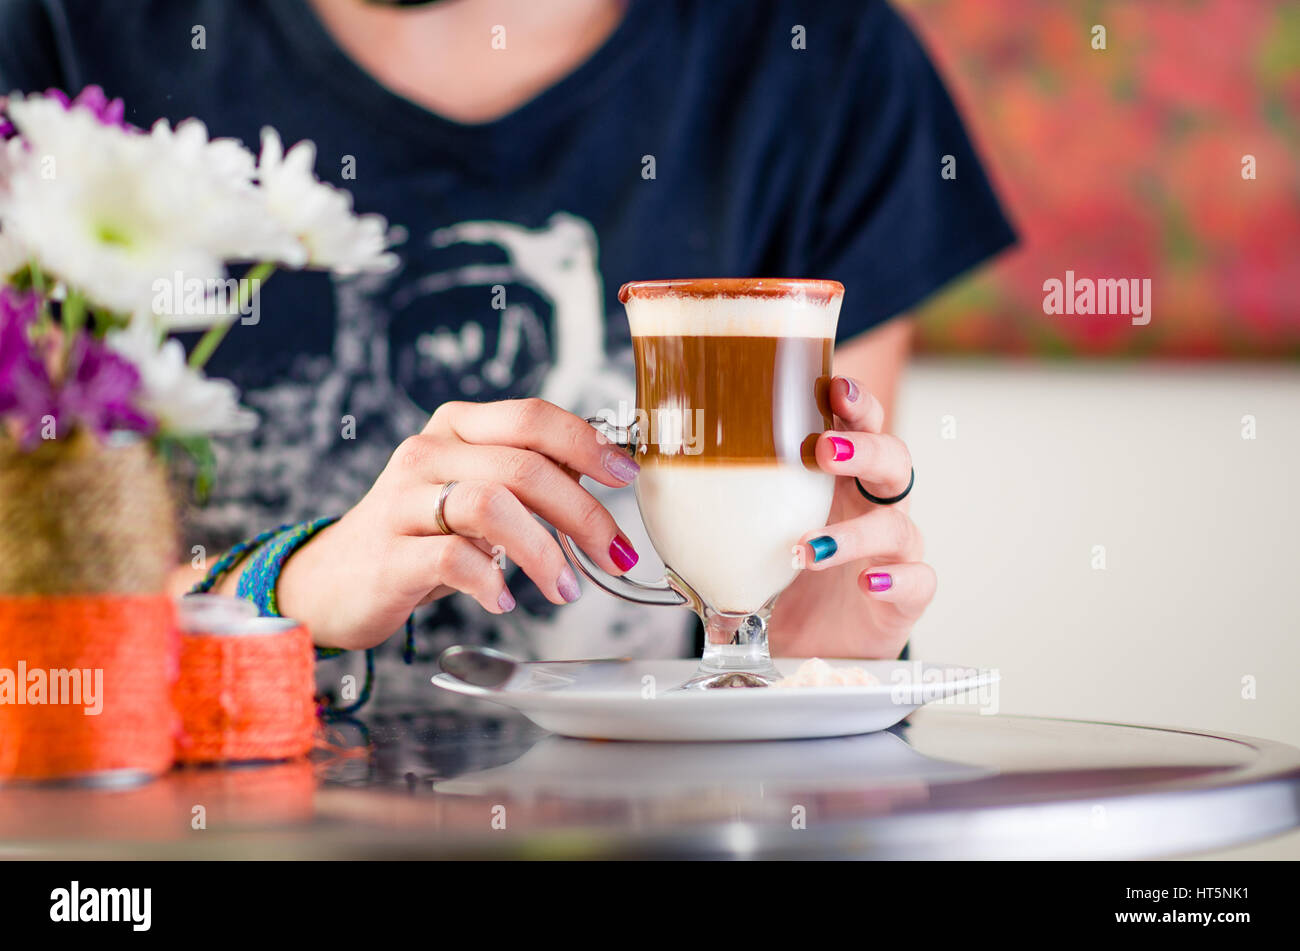 Girl drinking cappuccino inside an art cafe while reading a book Stock Photo